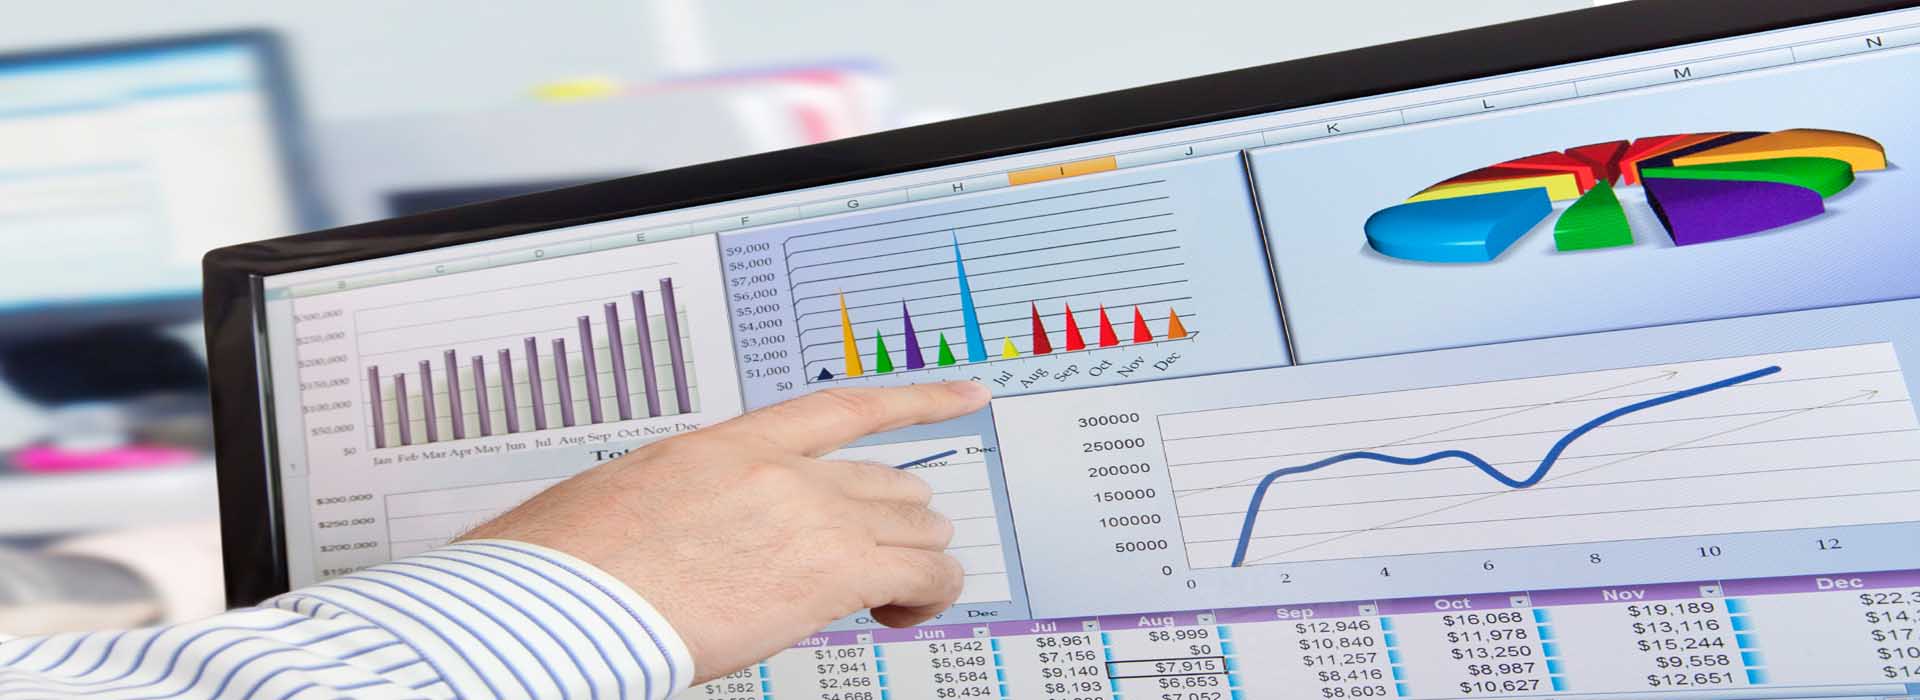 Use Financial Modeling Services to Seize New Opportunities